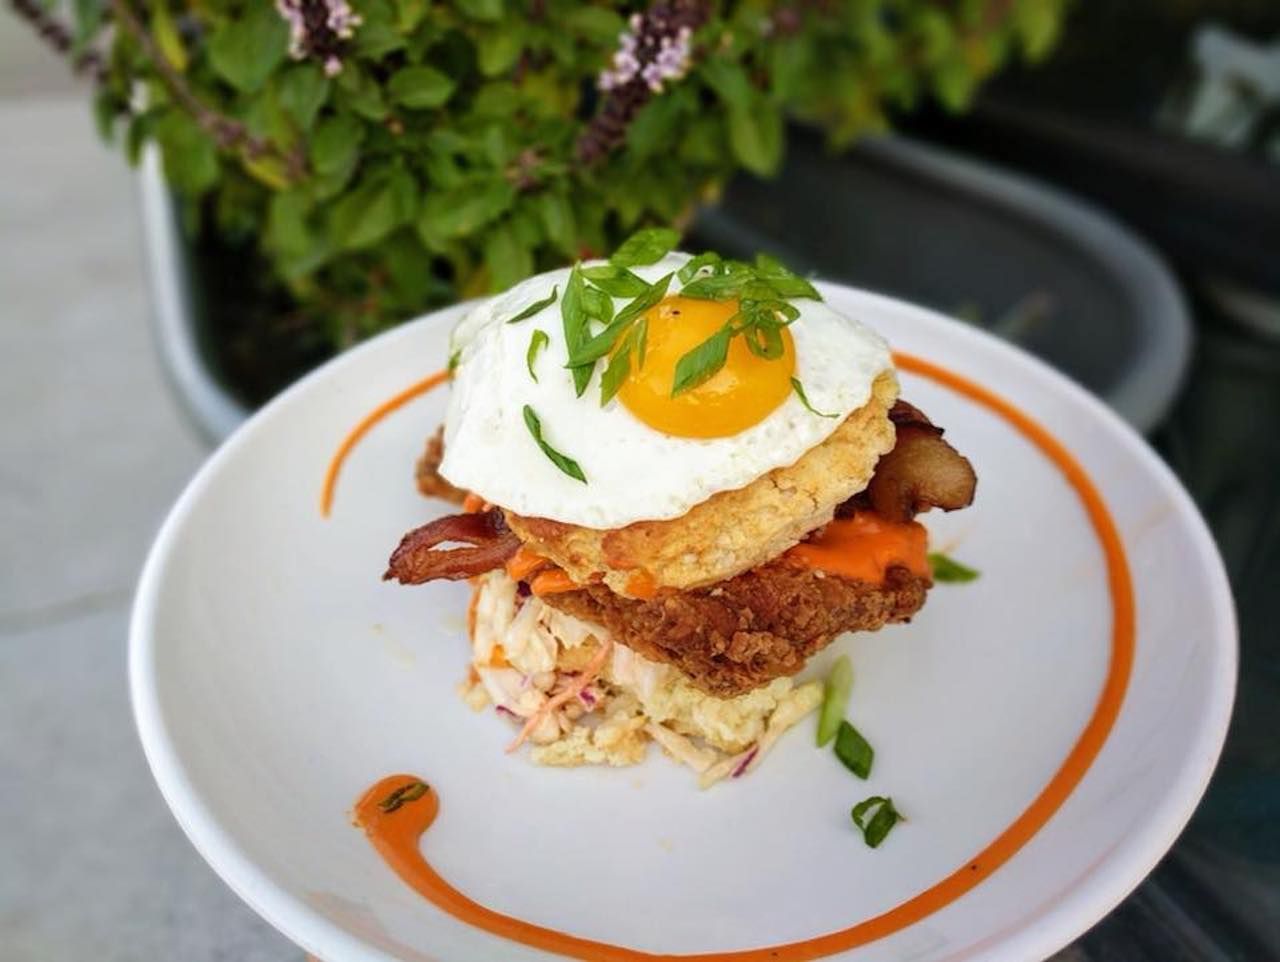 Biscuit head fried chicken sandwich topped with a fried egg